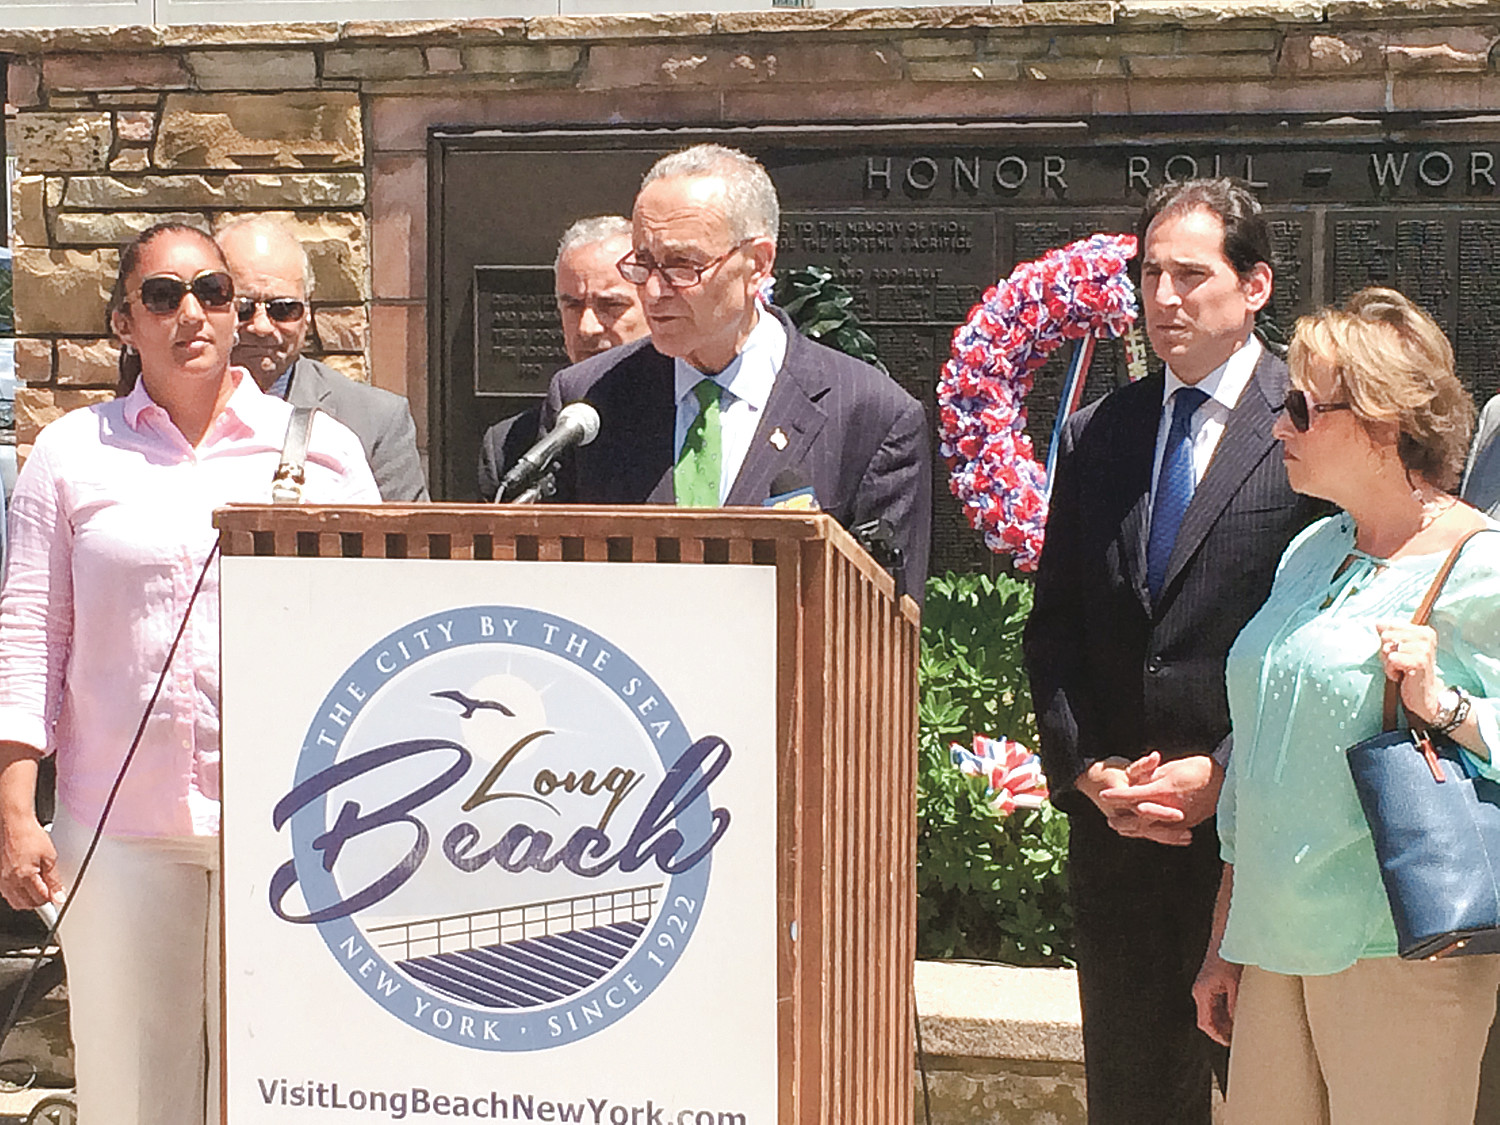 Matthew Ern/ Herald
Sen. Charles Schumer stood with local officials and homeowners impacted by Hurricane Sandy to outline the change in the insurance claims review process.